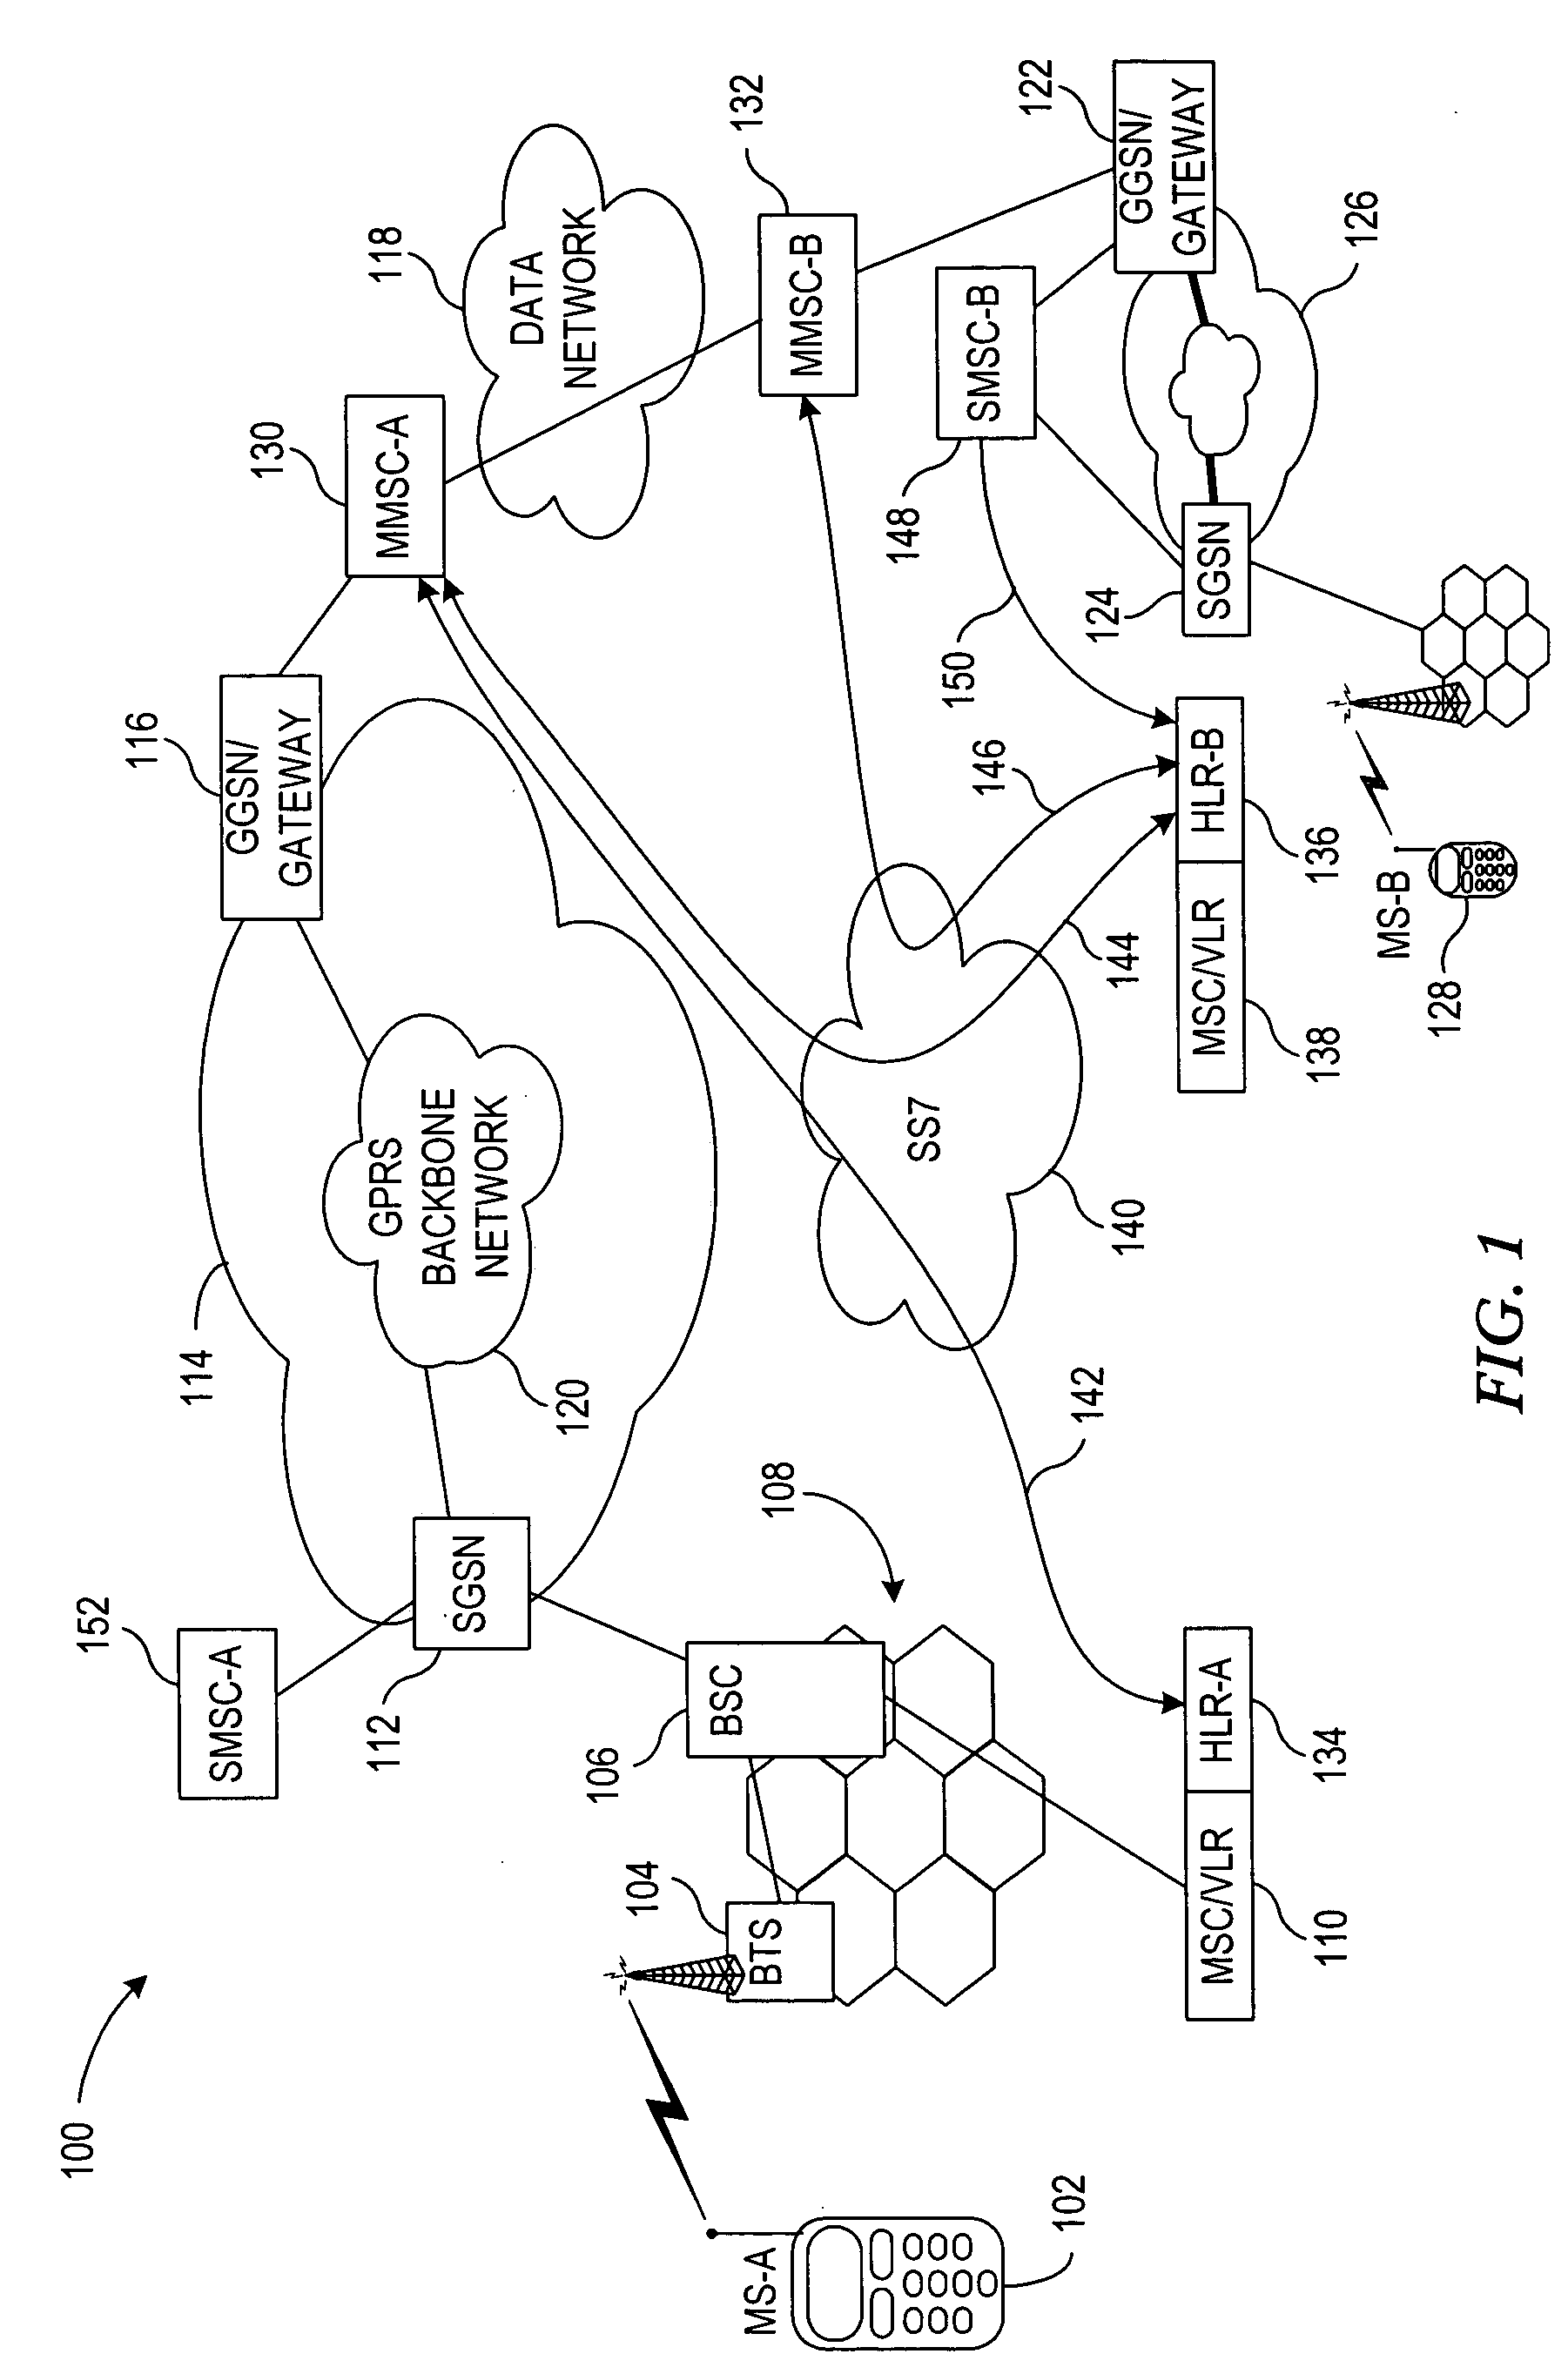 System and method for reducing subscriber database loads